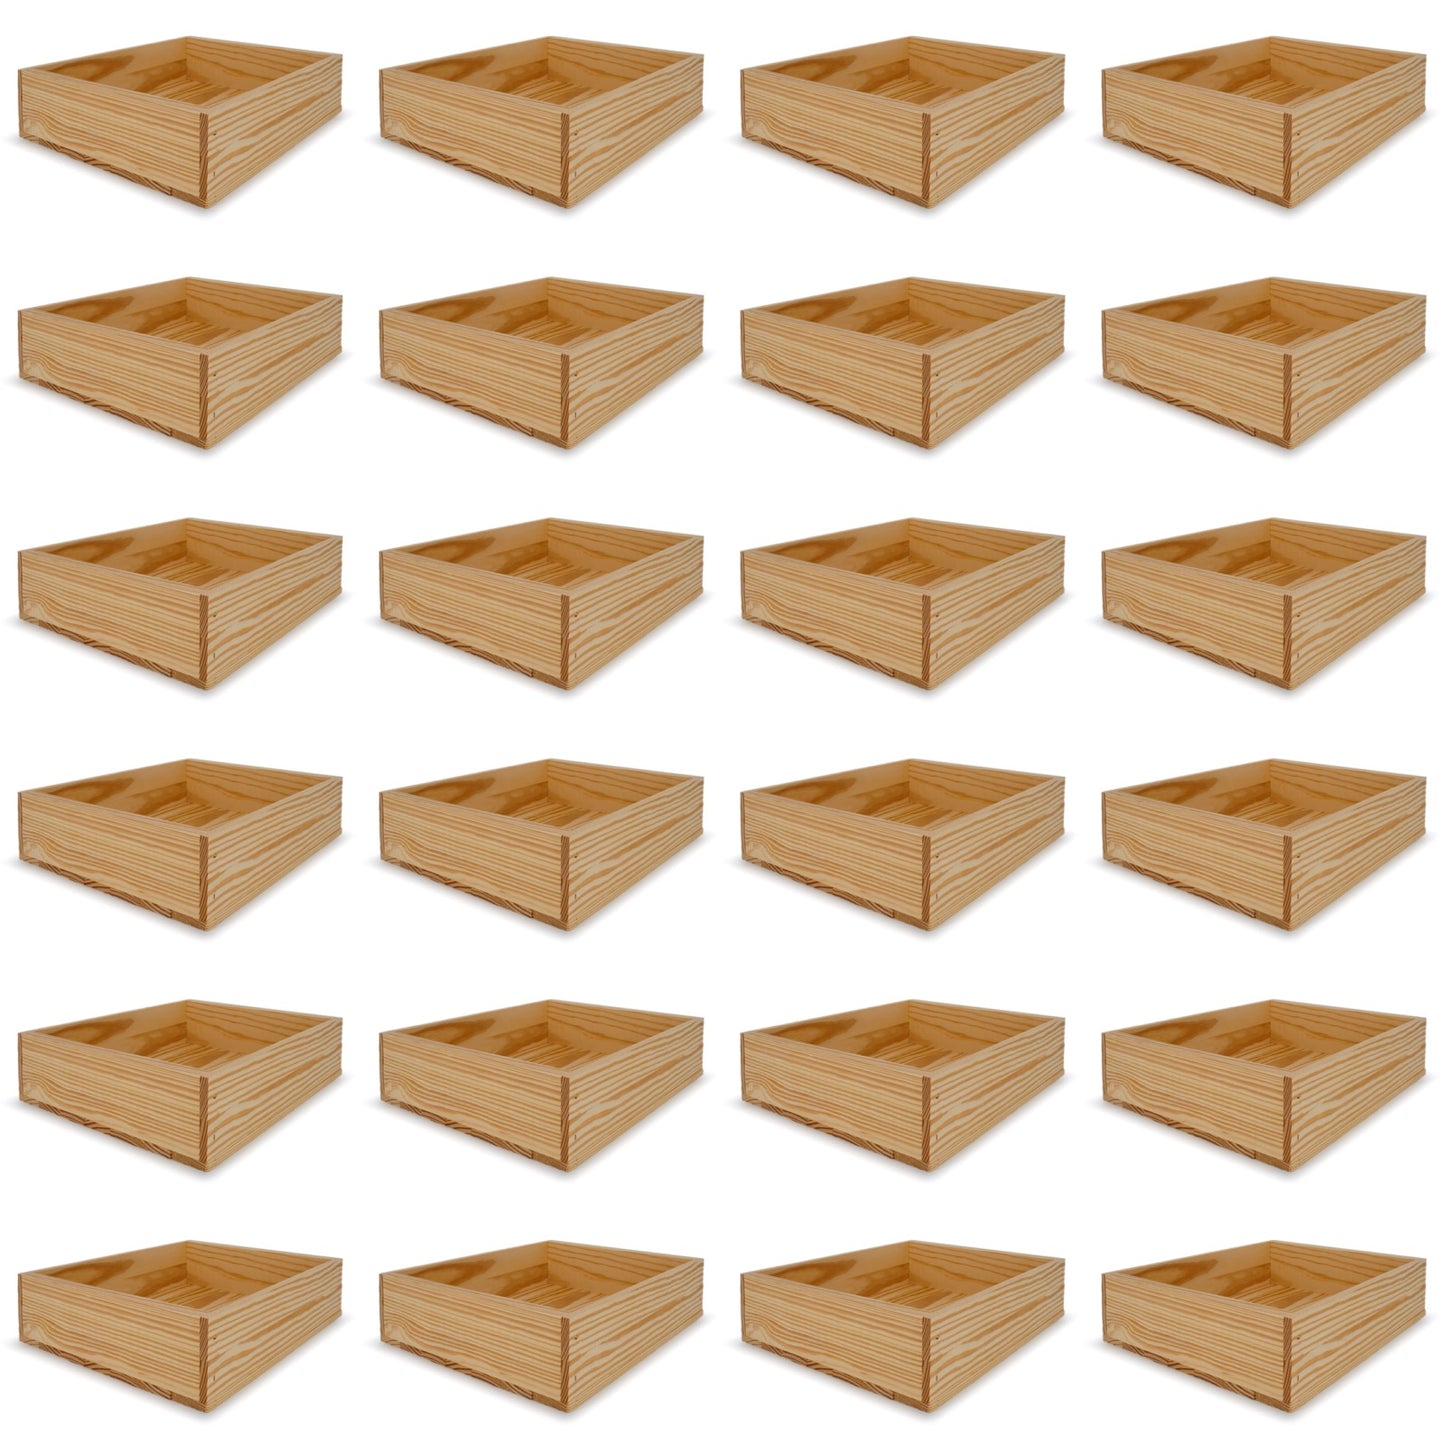 24 Small wooden crates 14x11.5x3.5